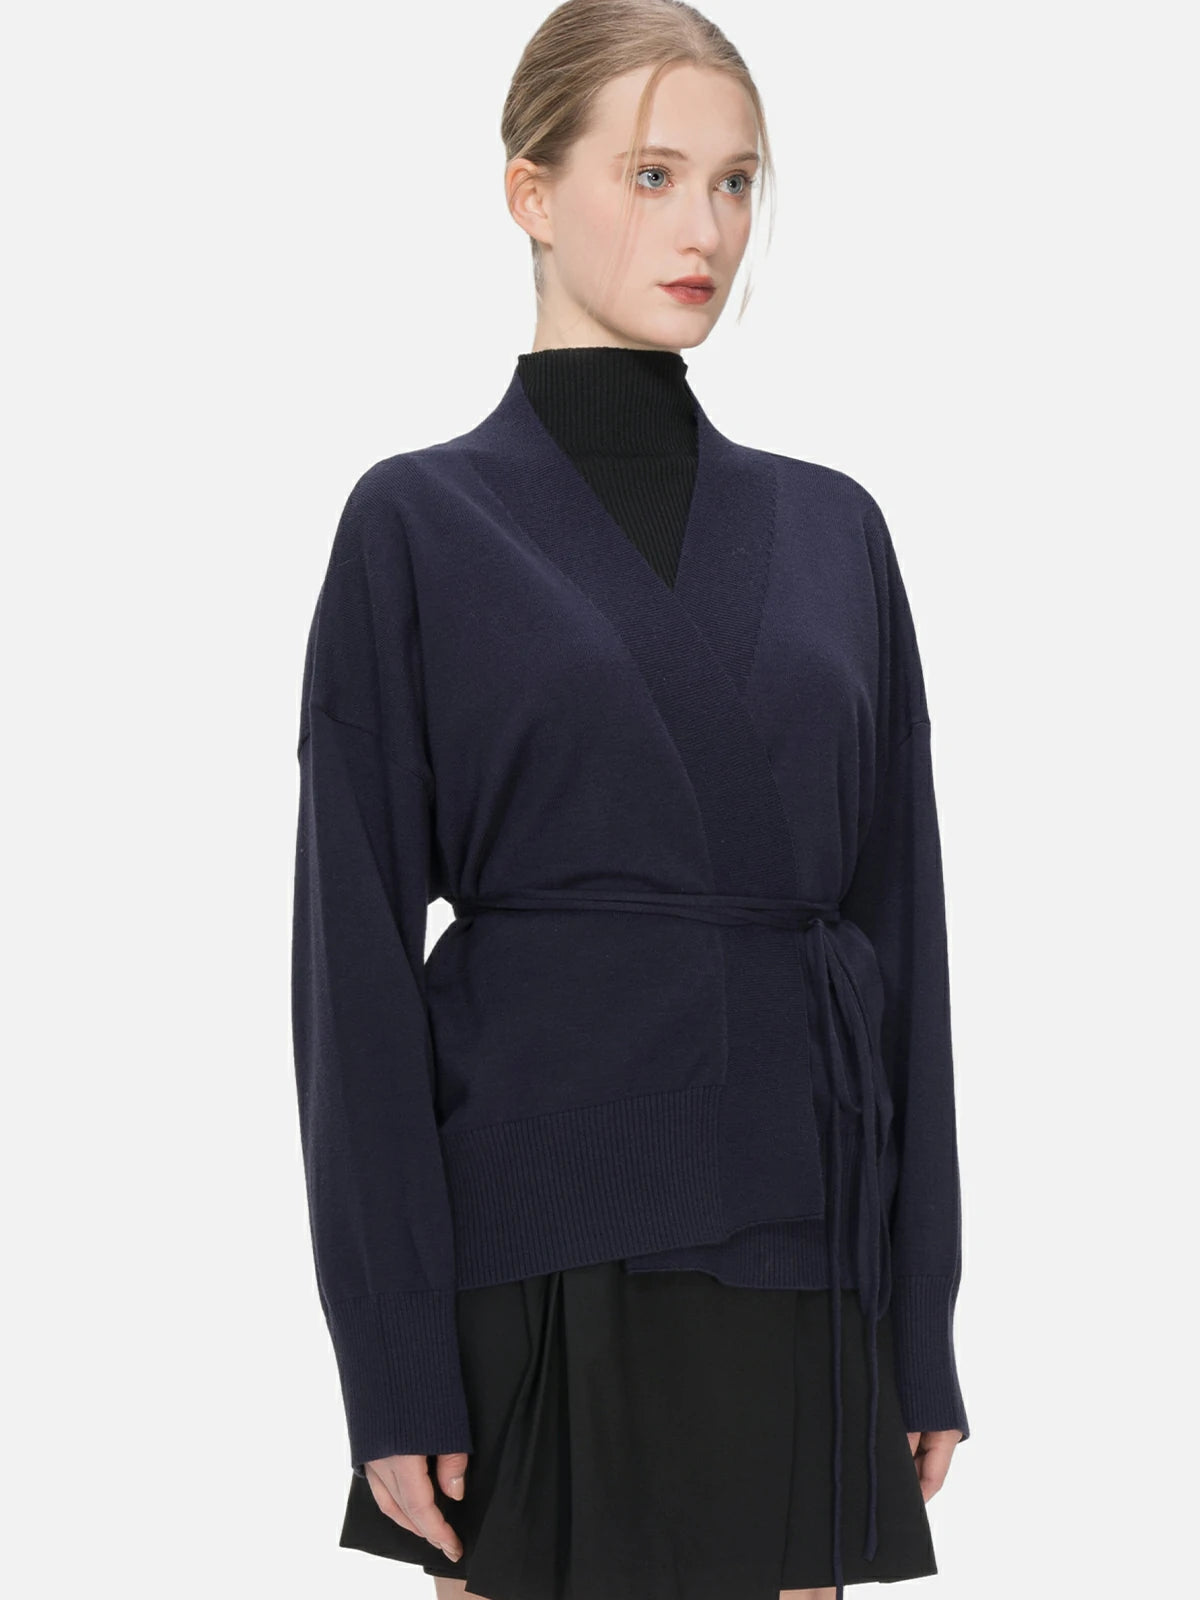 Comfortable dropped shoulder navy blue knitwear